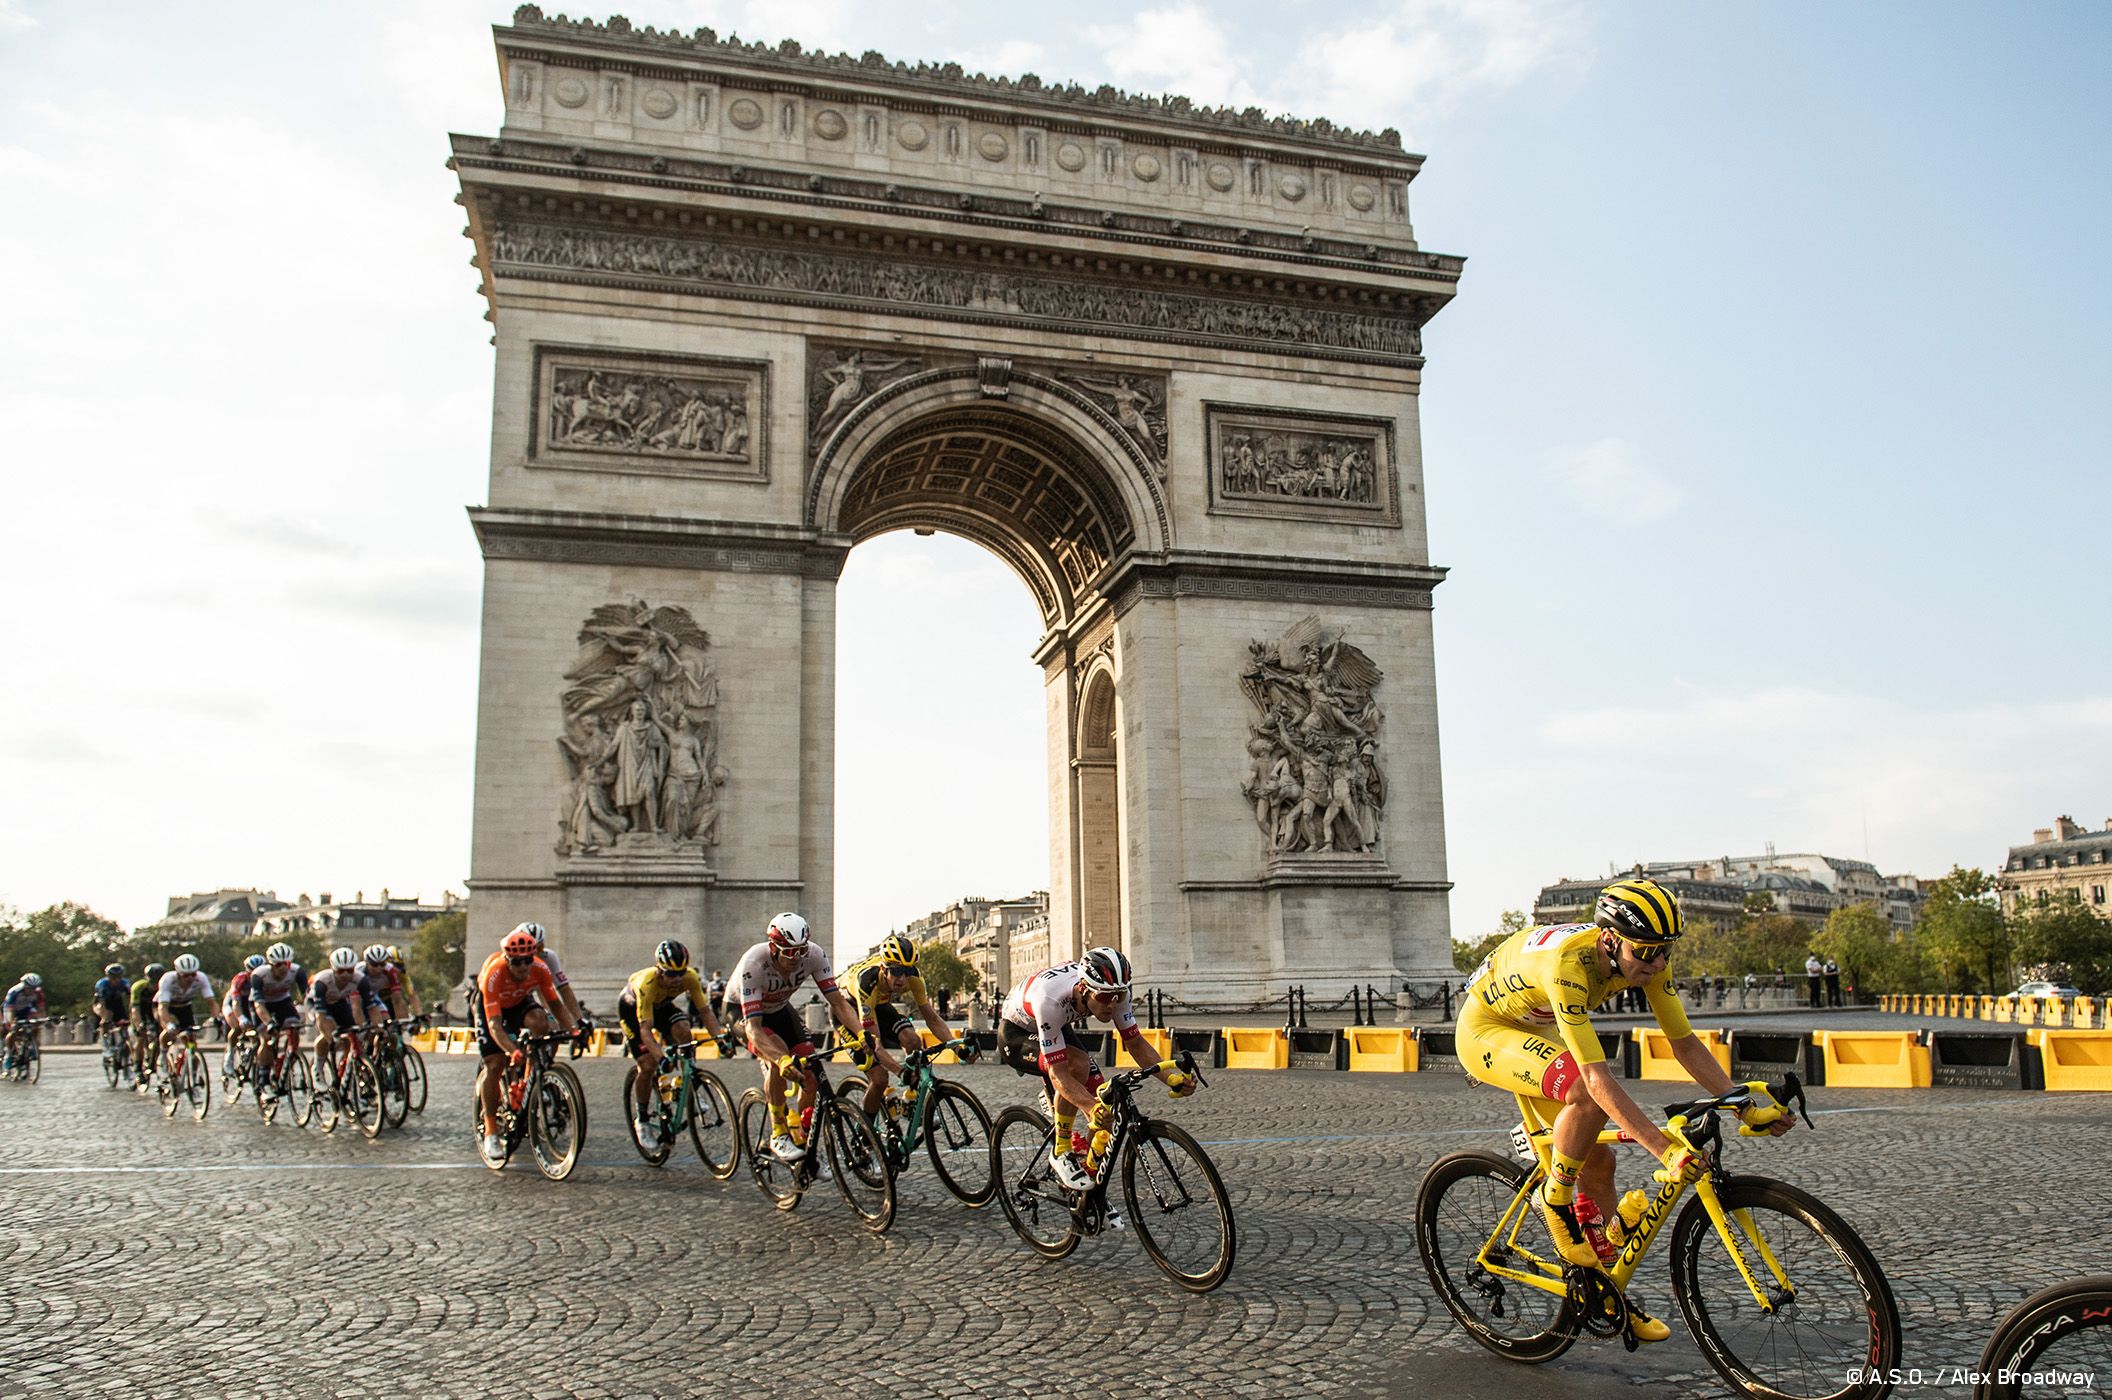 A Tour de France™ landmark and the setting for the final stage